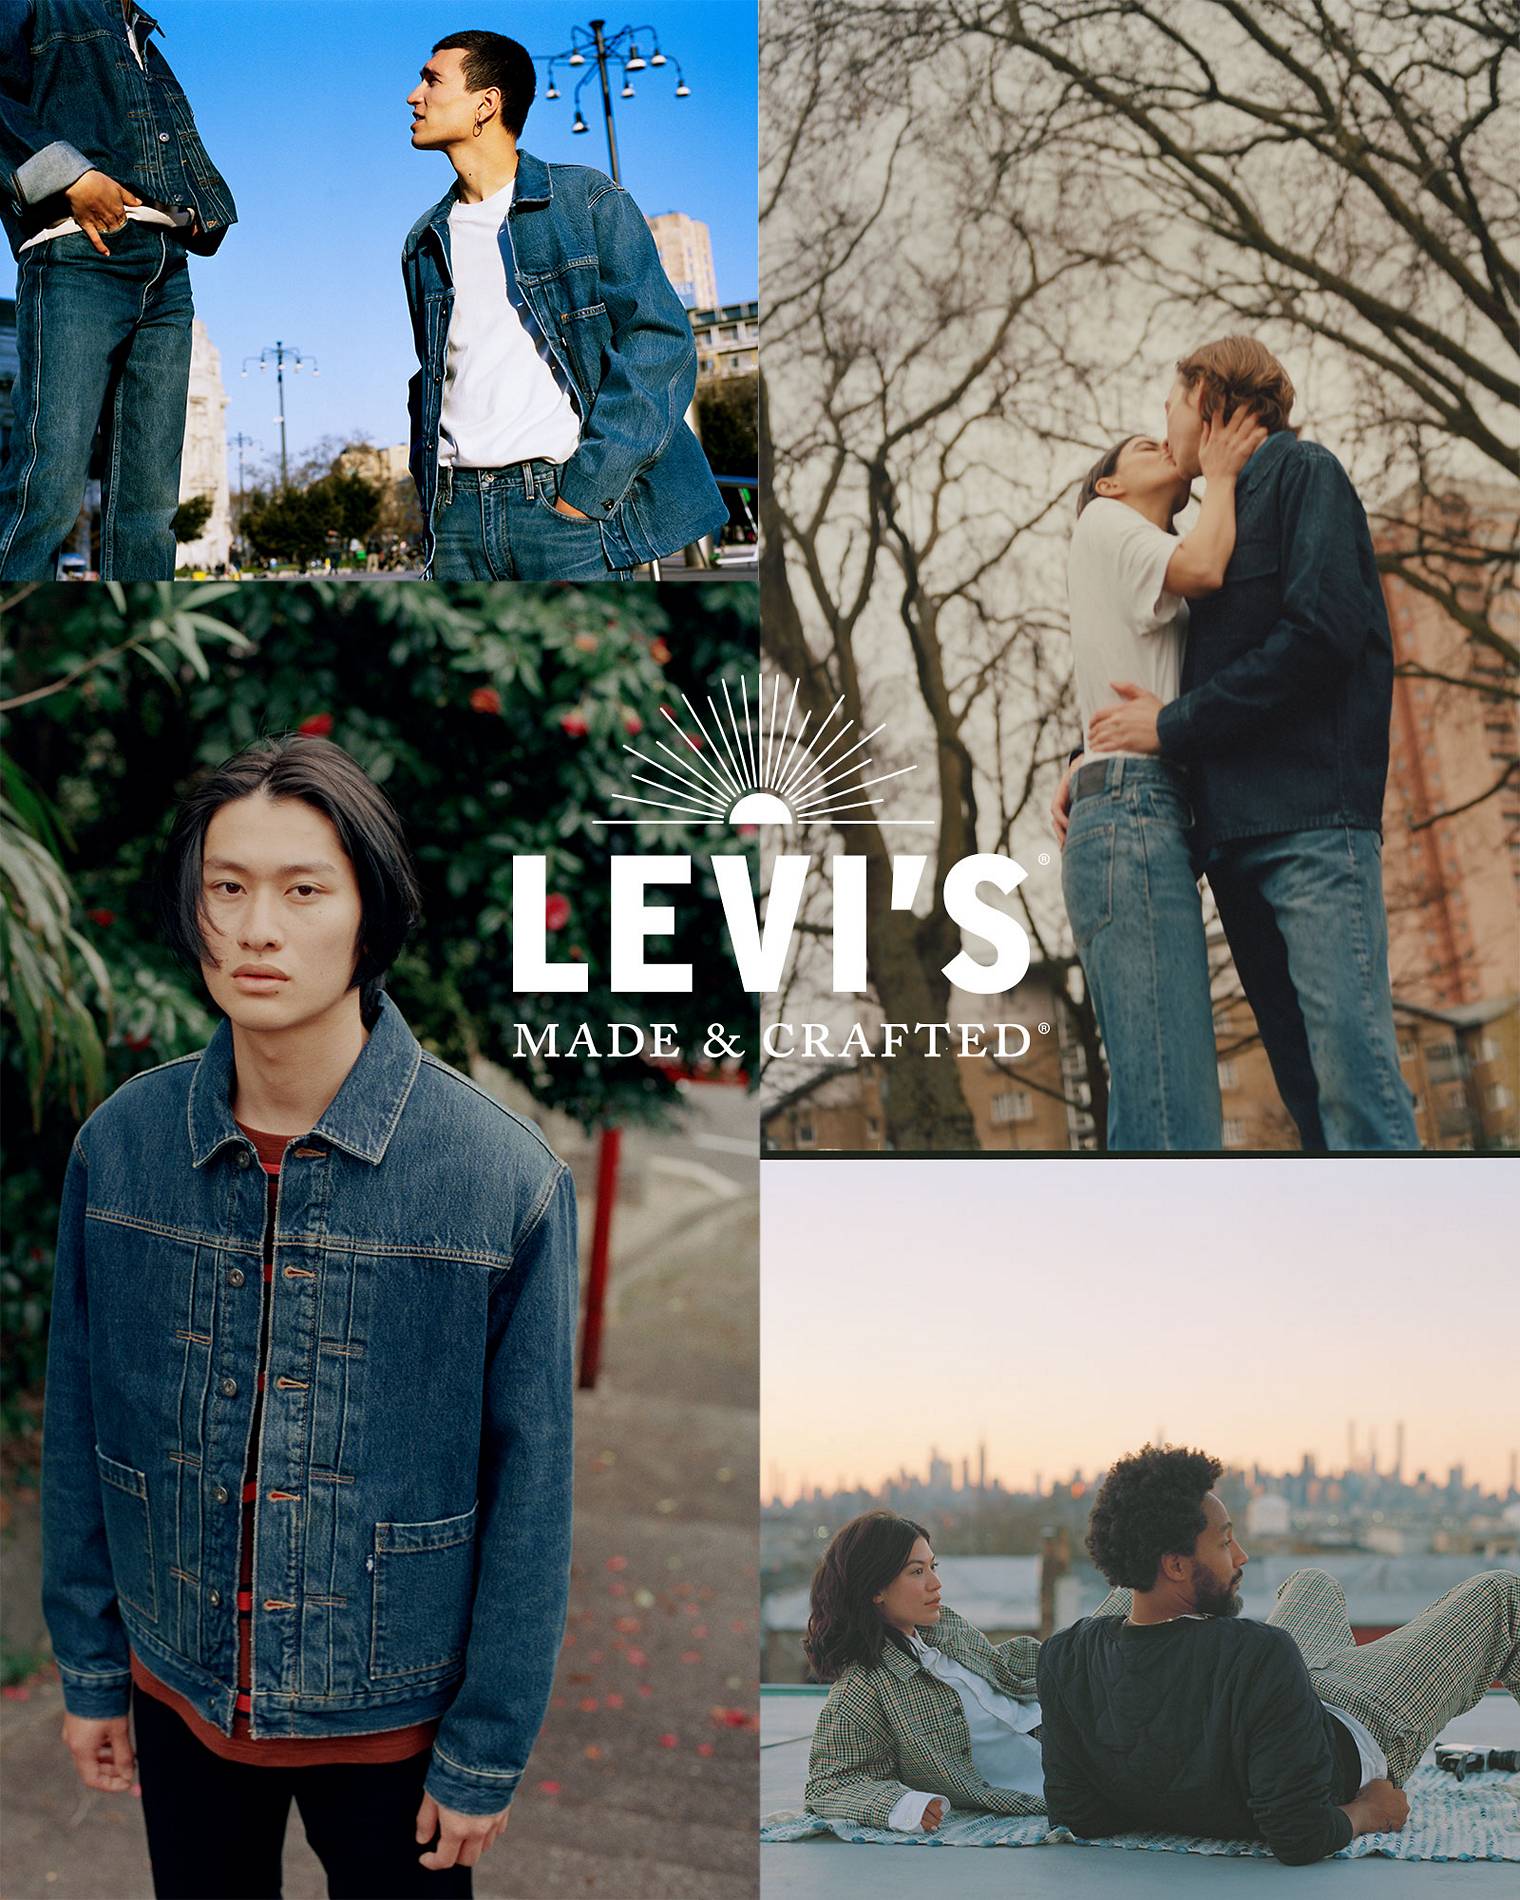 Models in different cities around the world wearing different Levi's jackets